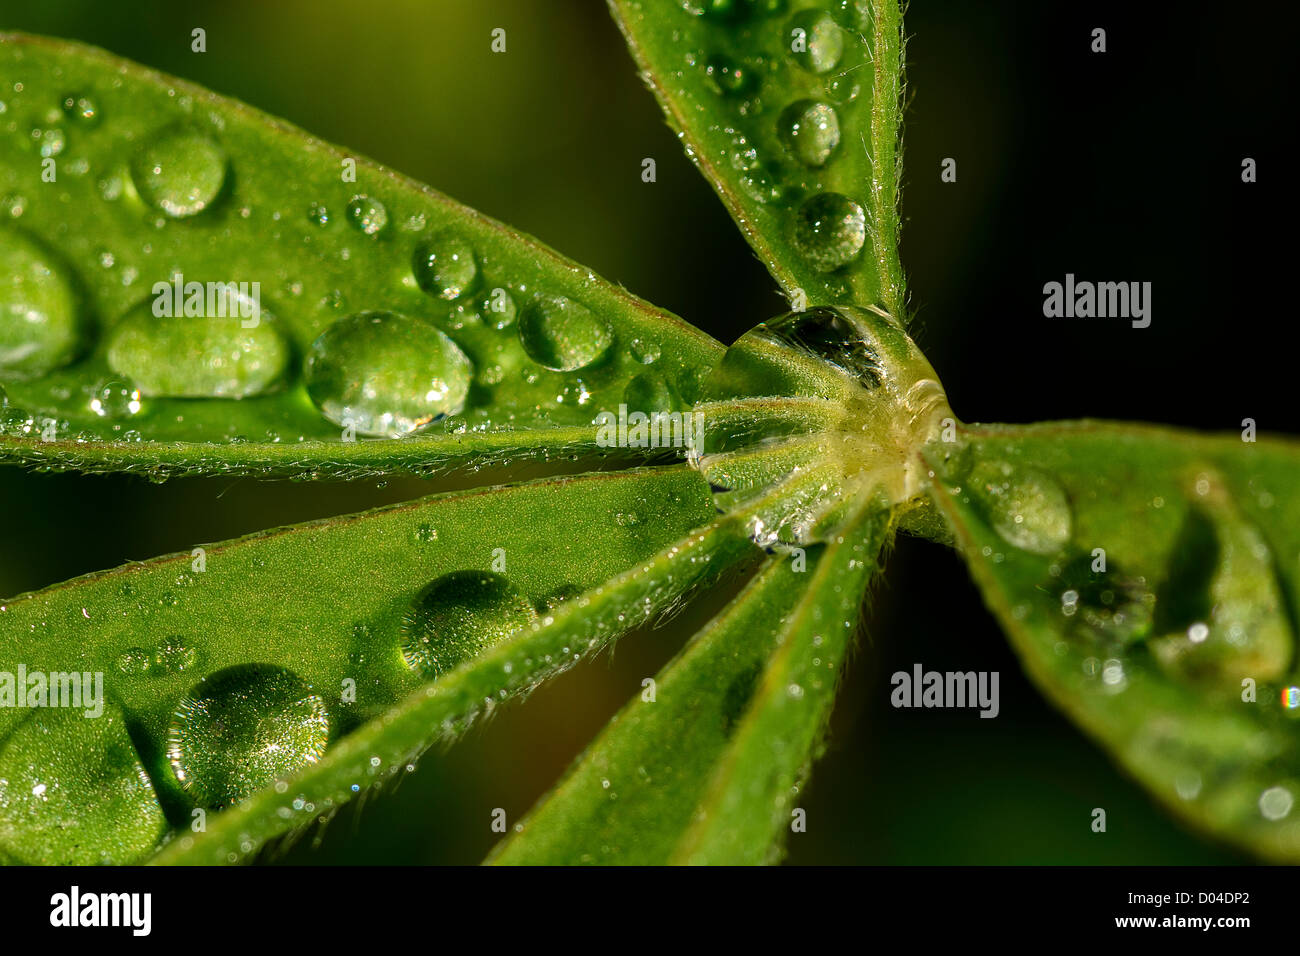 Water (dew) drops on a leaf Stock Photo